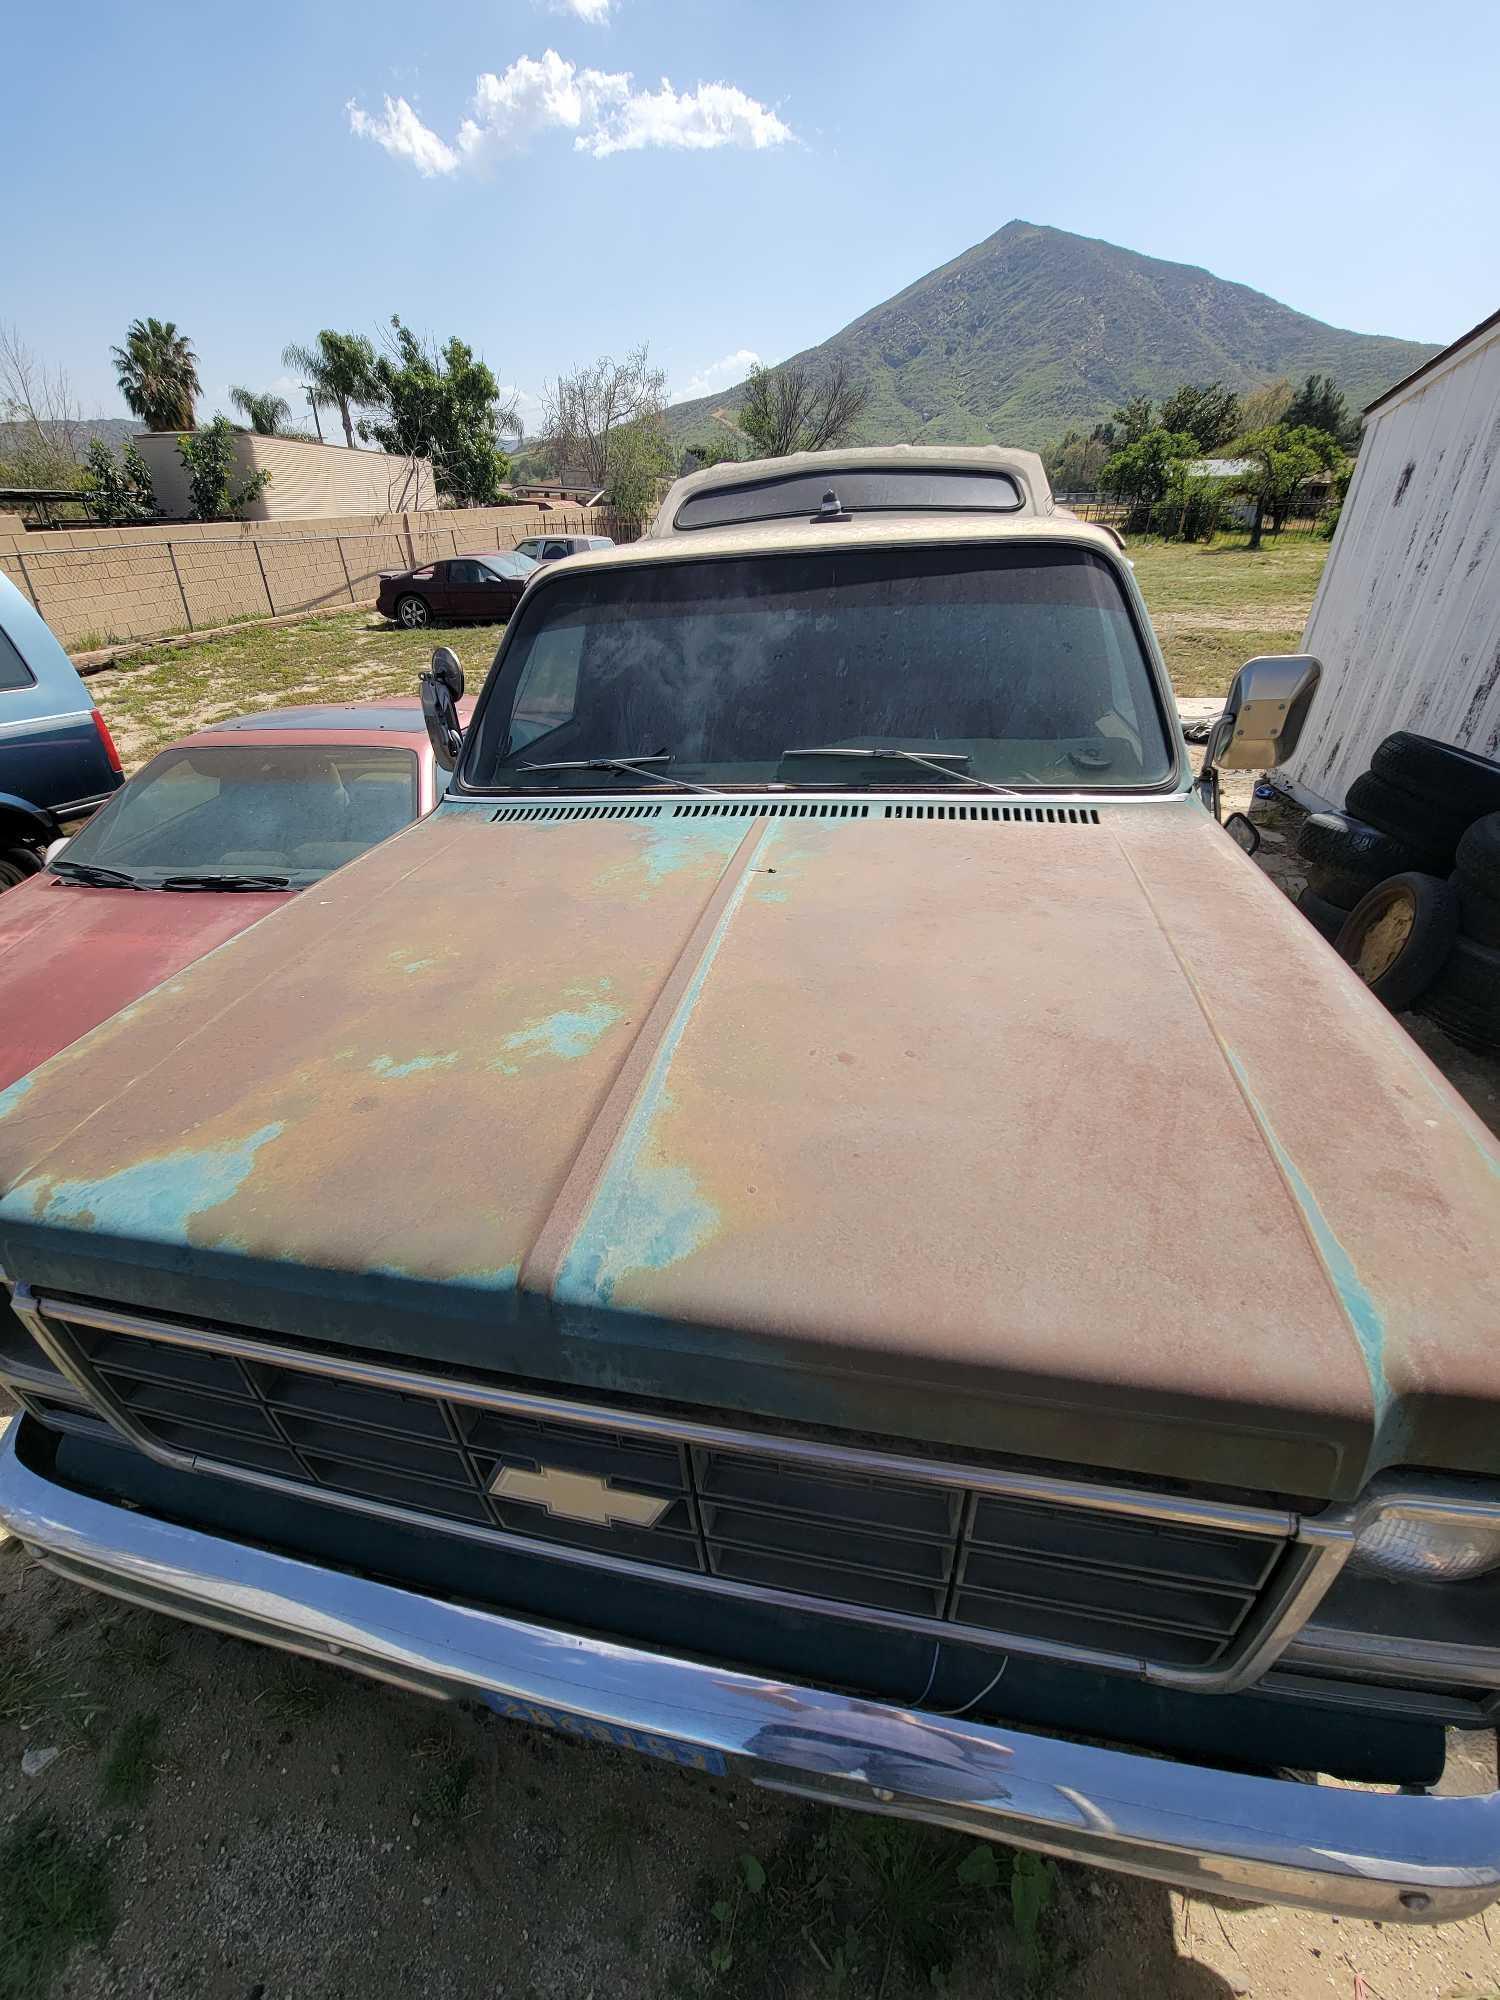 1979 Chevy Scottsdale c20 Pickup Truck with camper shell non running for parts w/ title